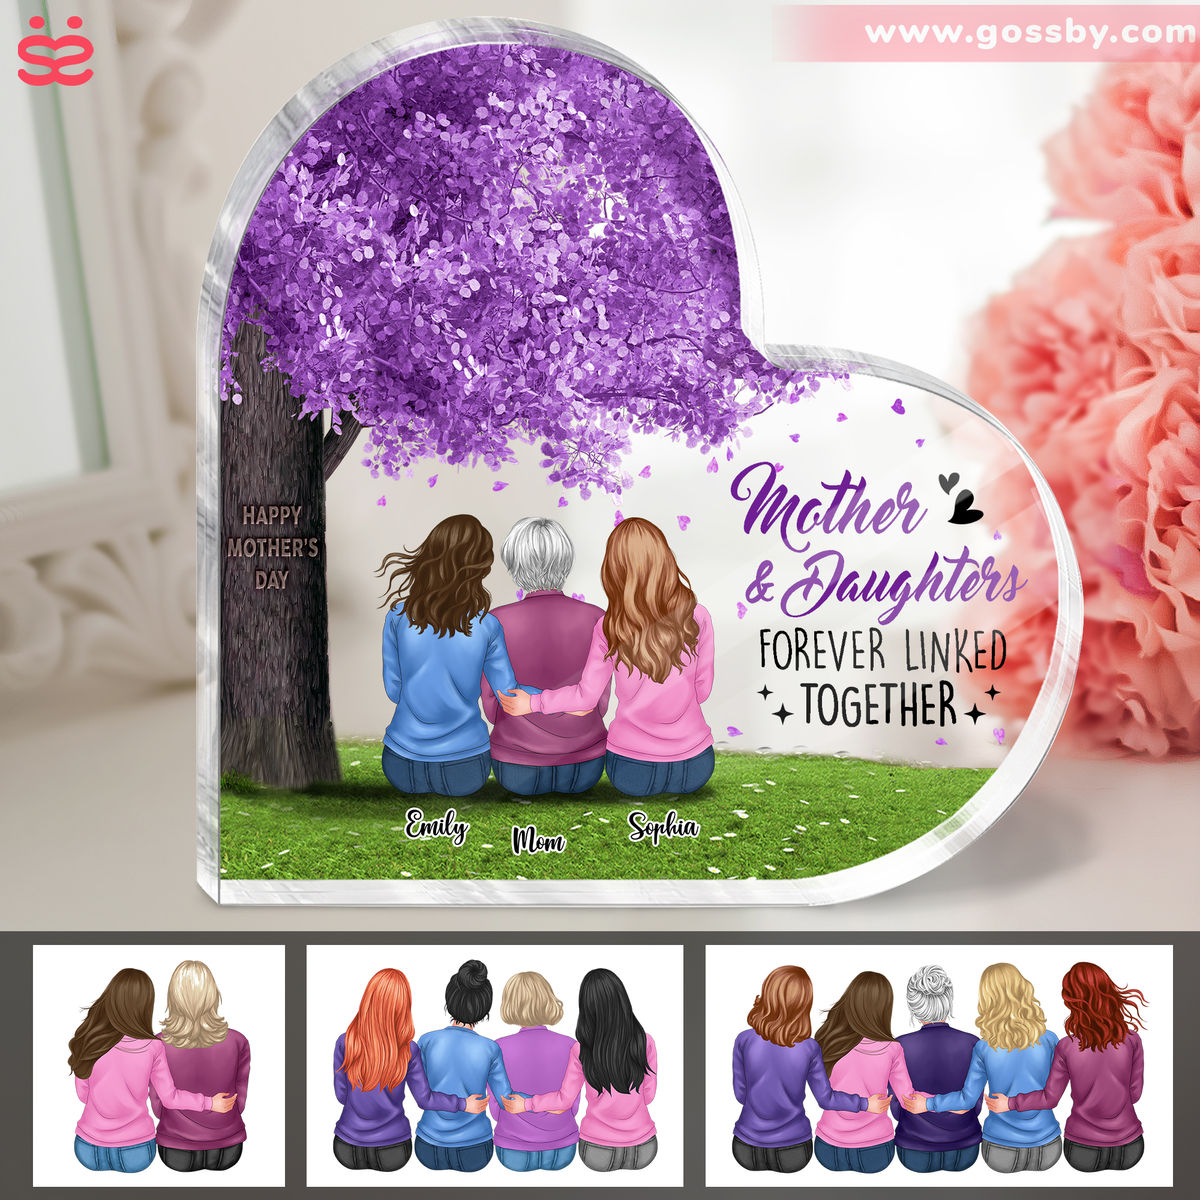 Personalized Desktop - Heart Transparent Plaque - Mother and daughters, forever linked together (23326)